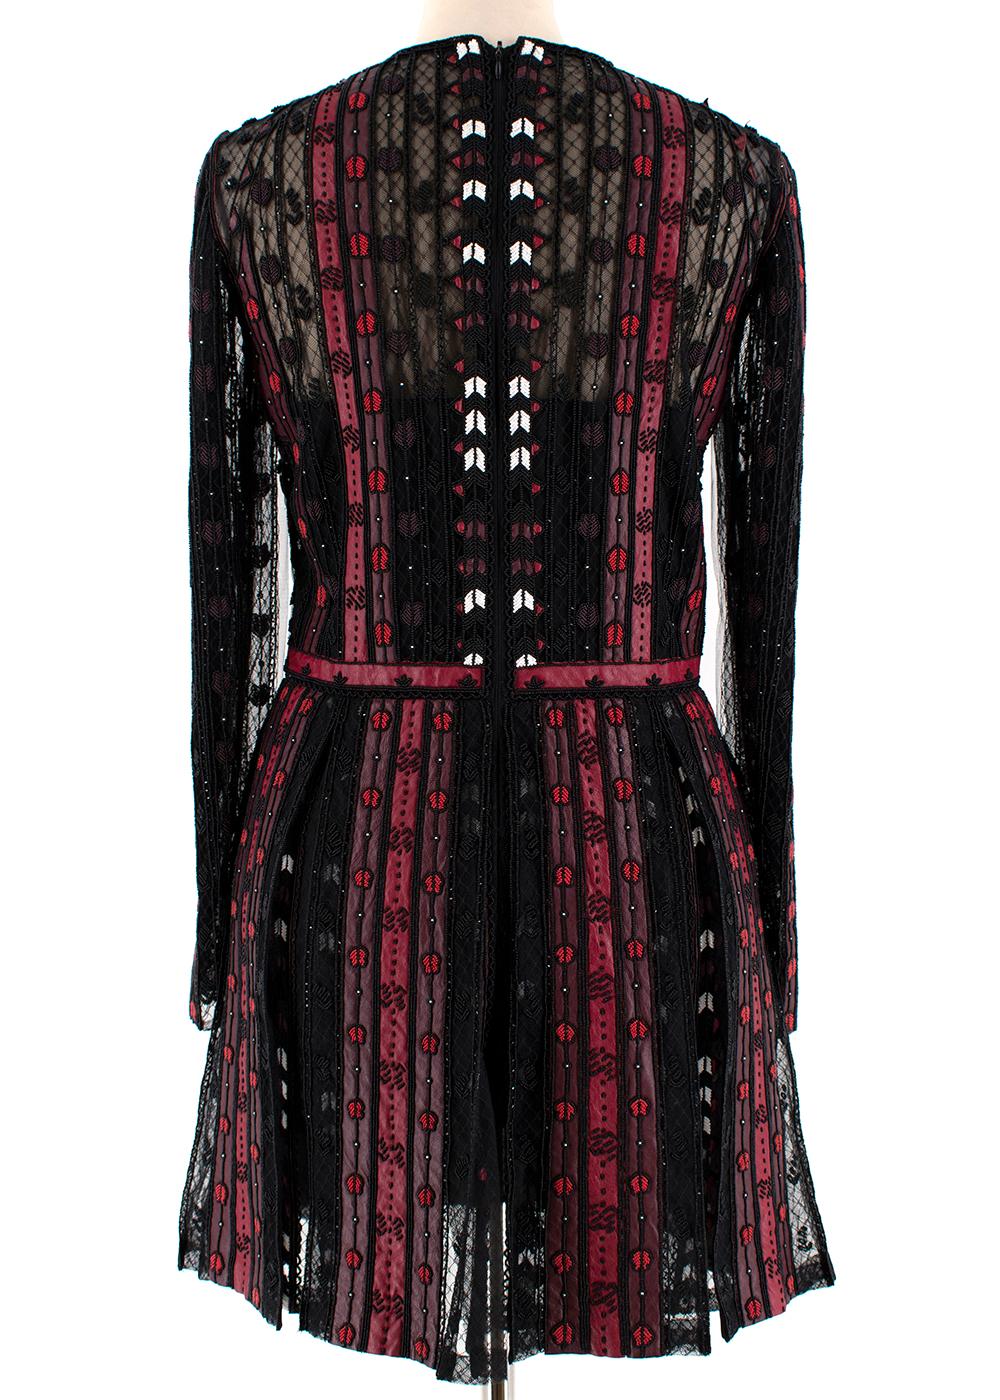 Valentino Black & Red Leather & Tulle Illusion Embroidered Dress - Size US 4 In Excellent Condition For Sale In London, GB